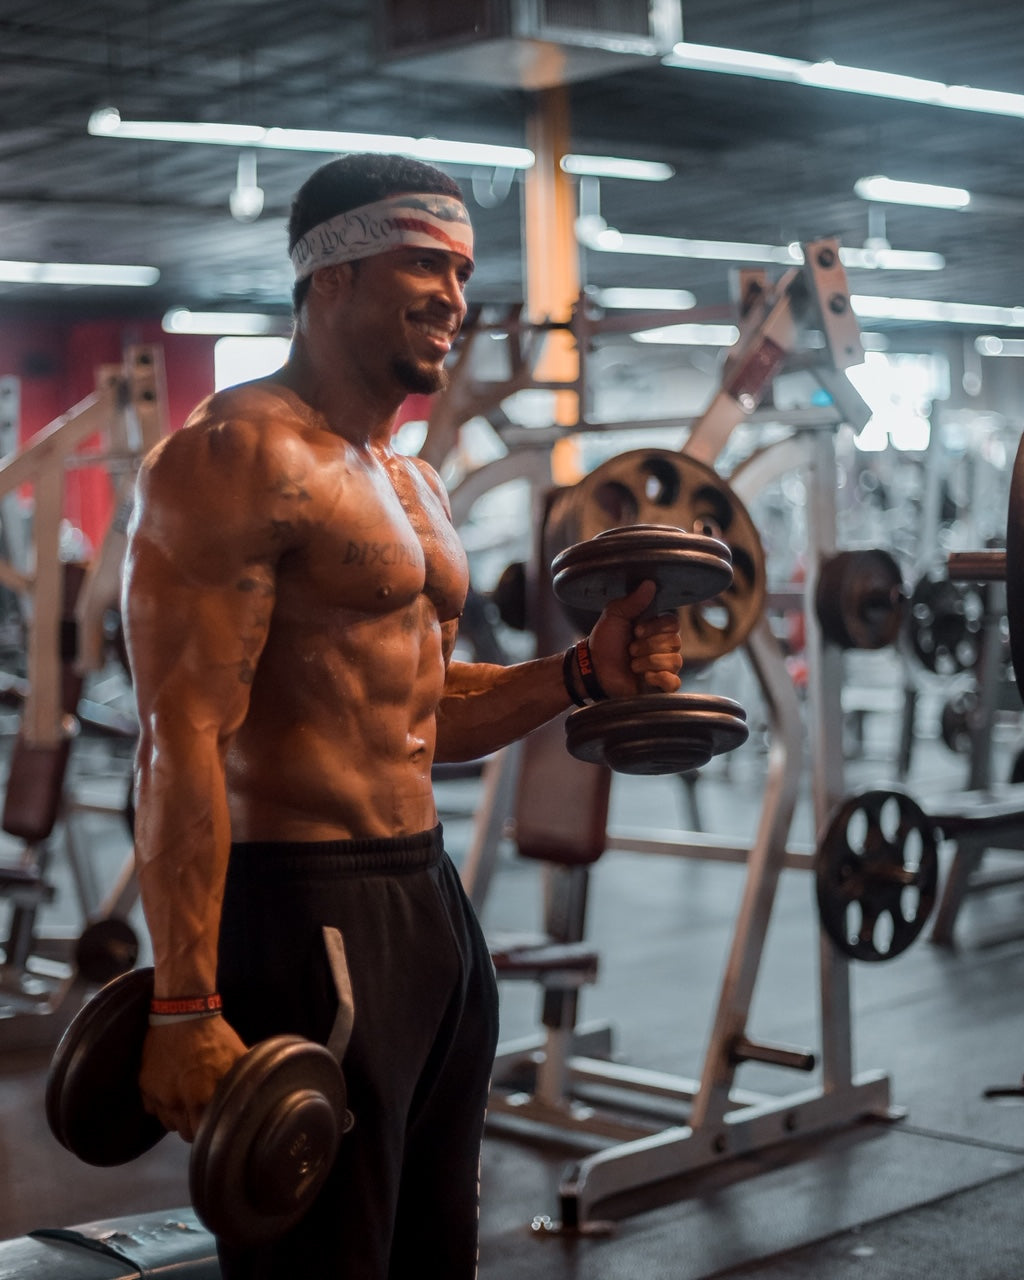 INTERVIEW: Meet Professional Fitness Athlete And Personal Trainer  Ronald Baez (NEW YORK)